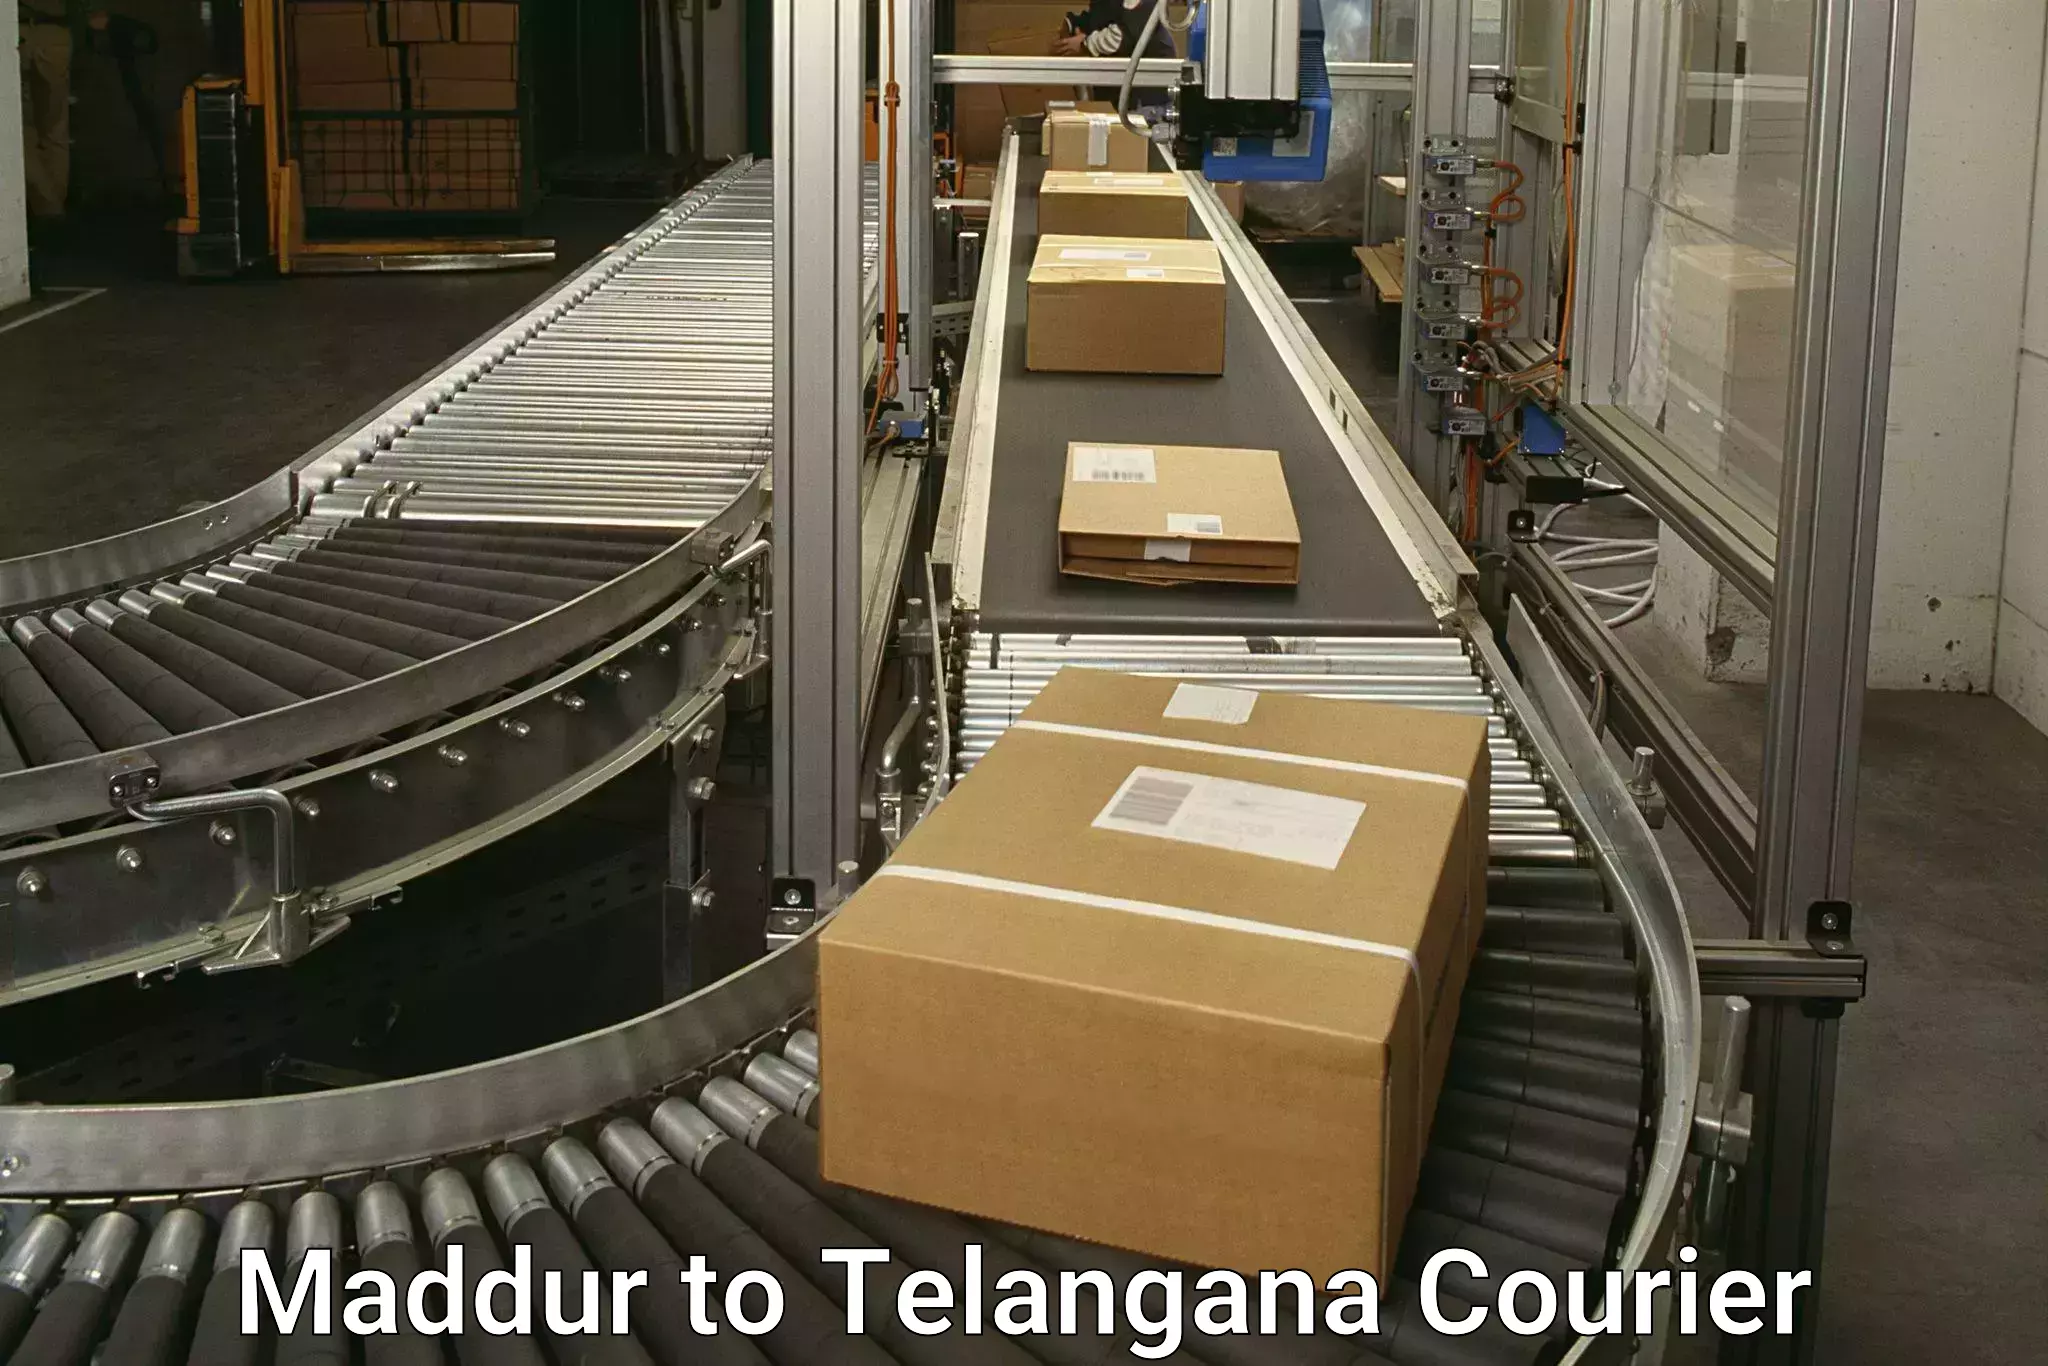 Express delivery capabilities Maddur to Hyderabad